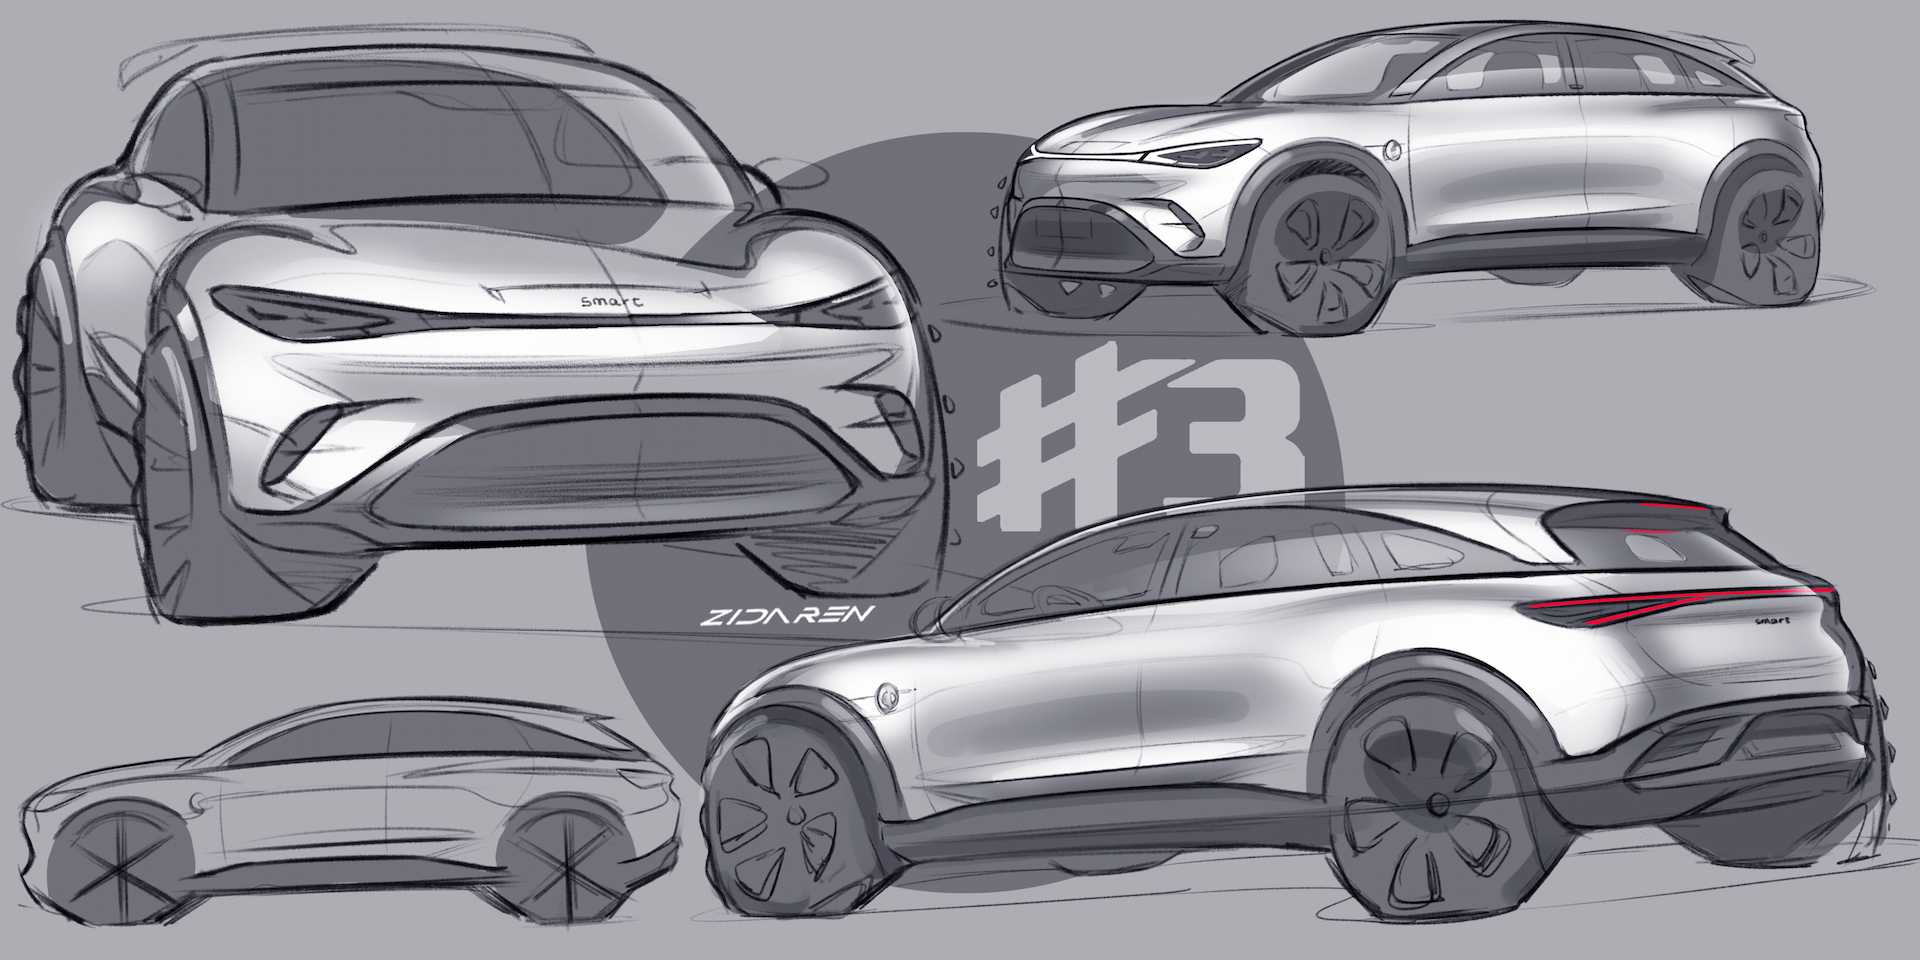 Design details of the all-new smart #3